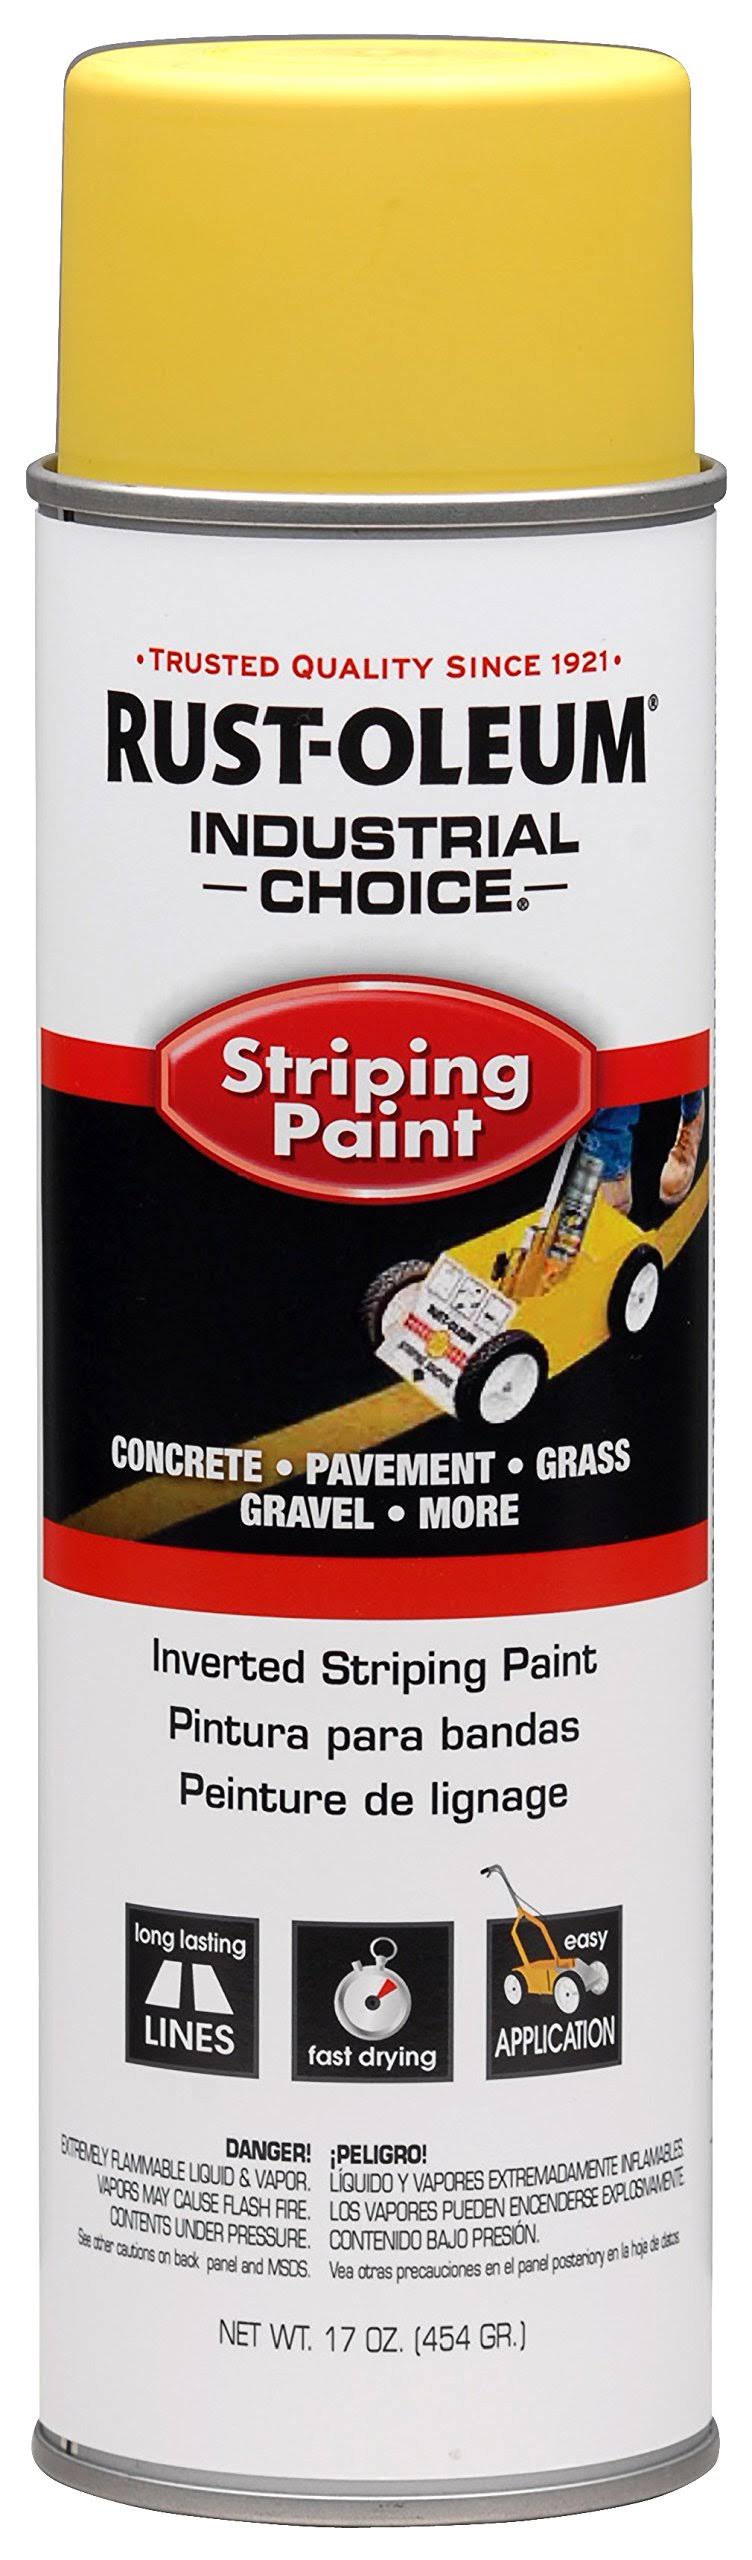 Rustoleum System Inverted Striping Paint - Yellow, 18oz